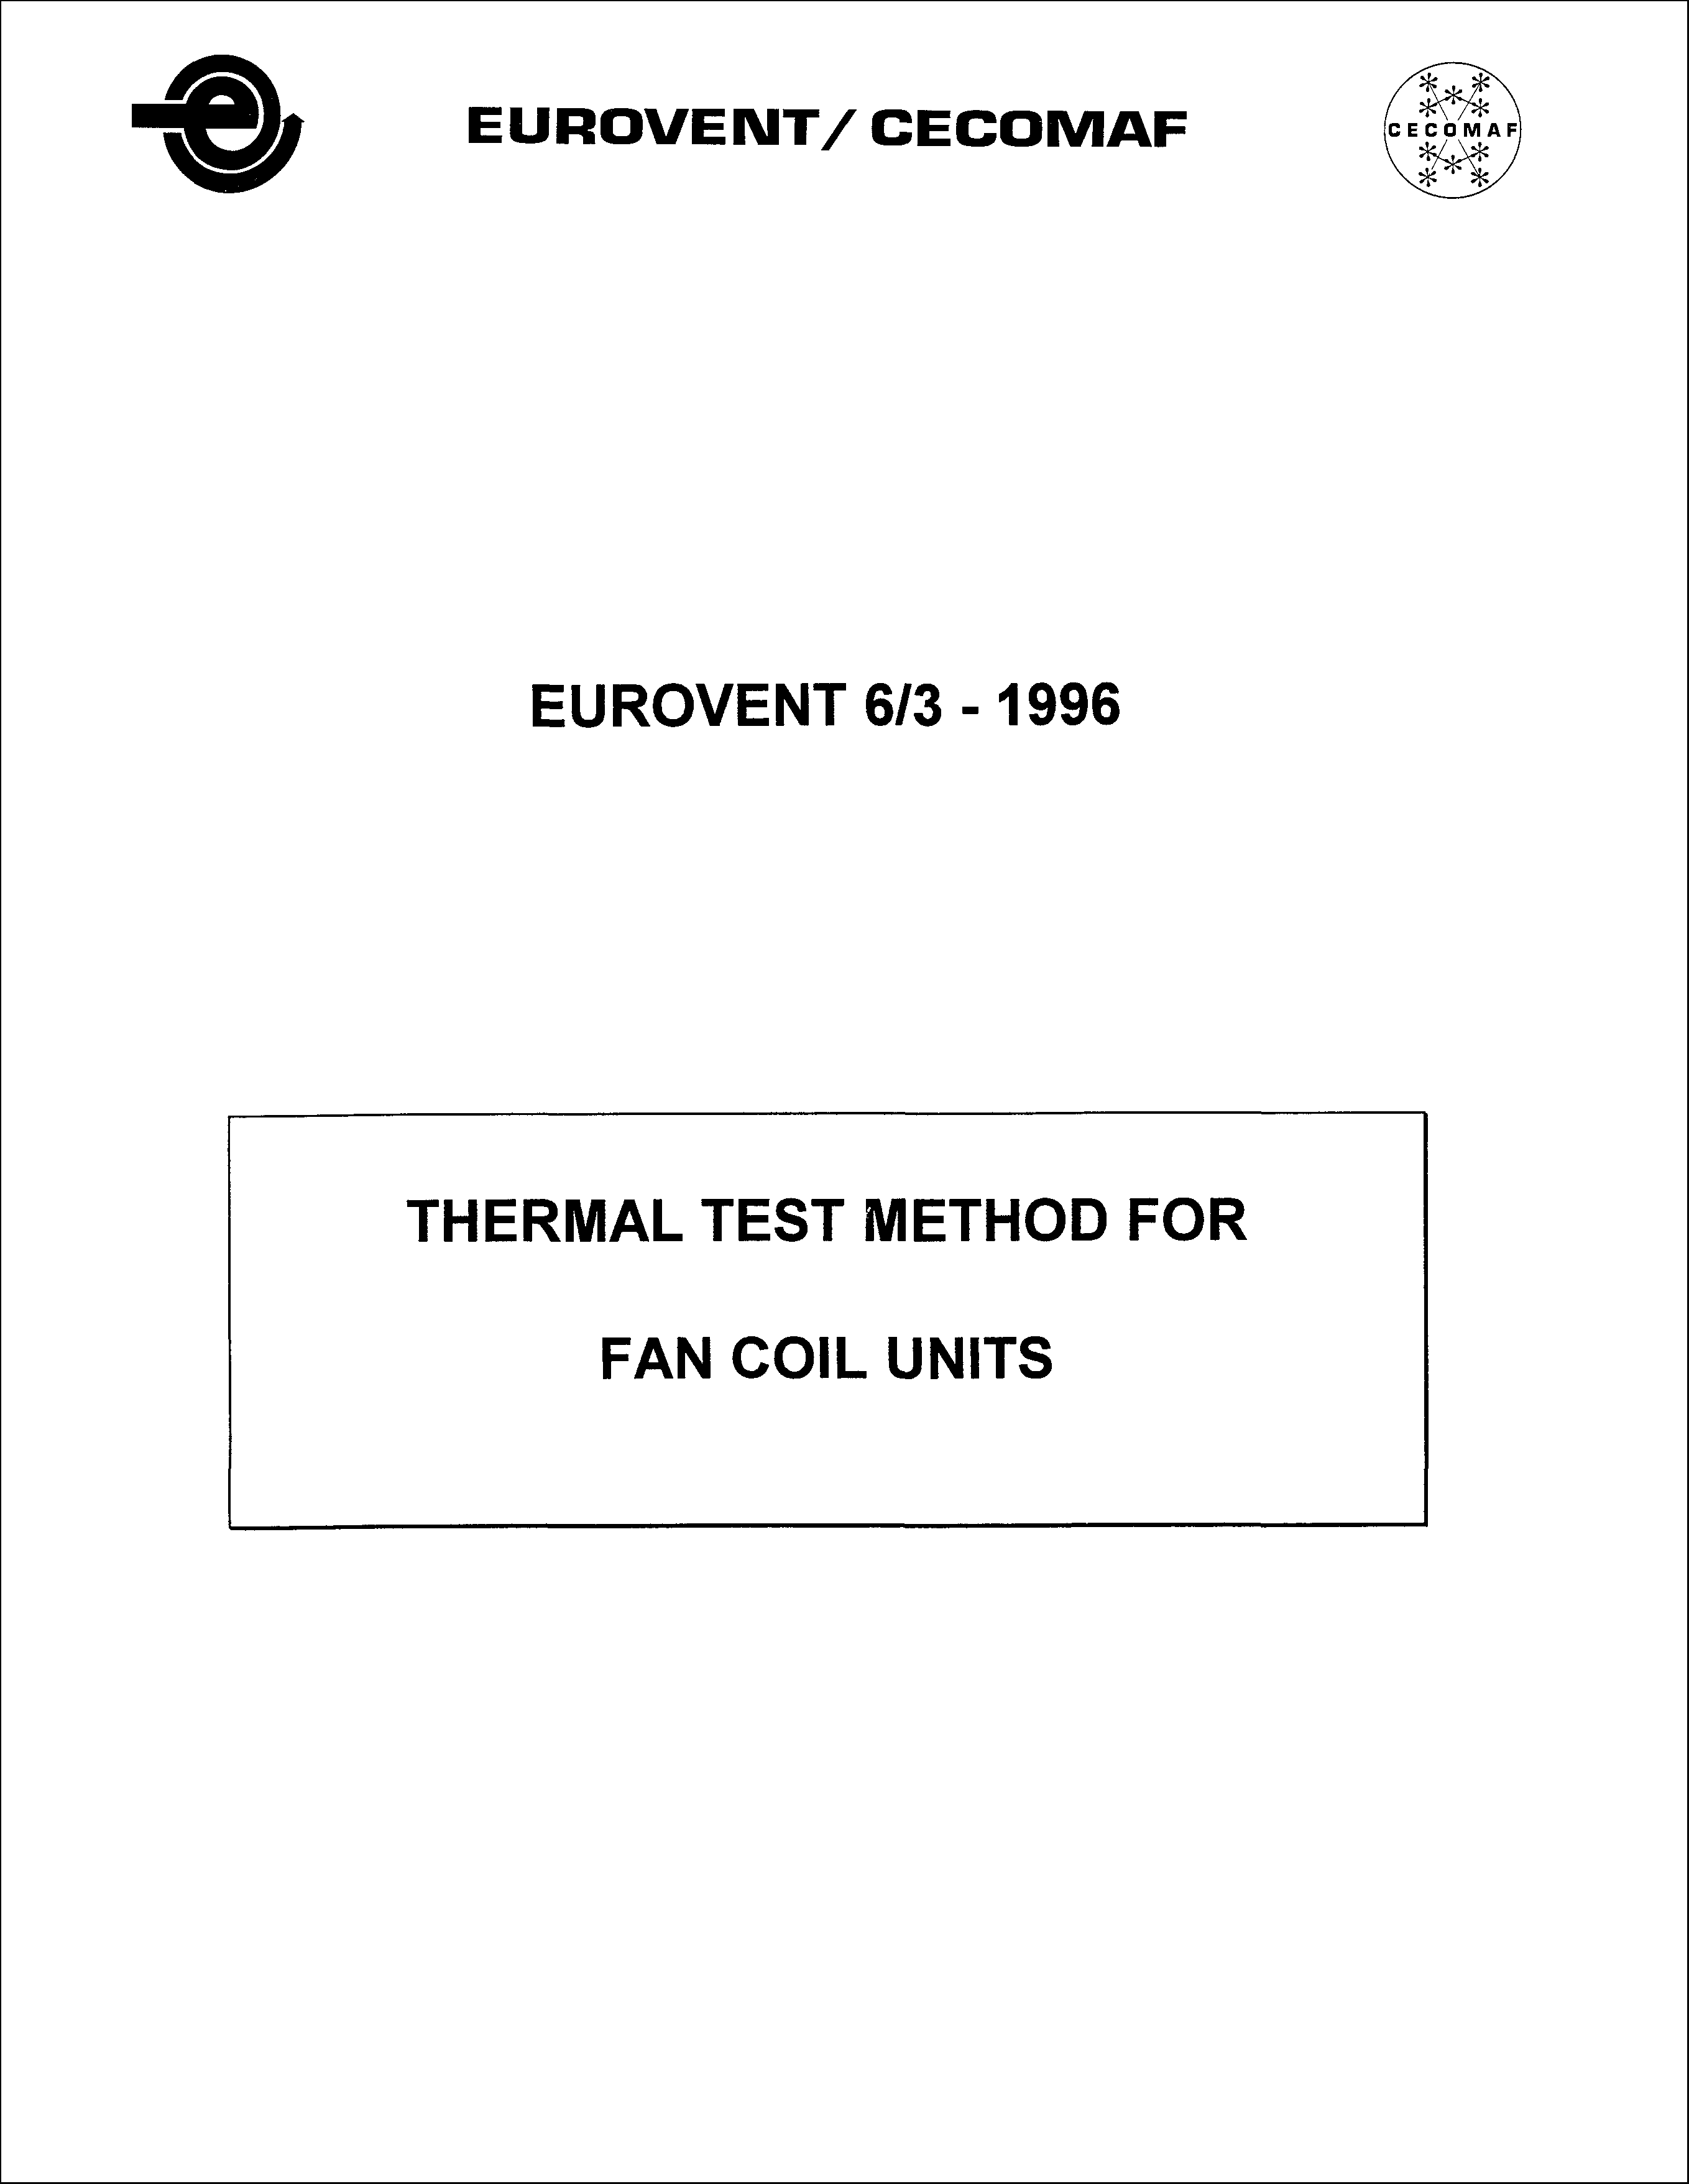 1996 - Thermal test method for fan coil units